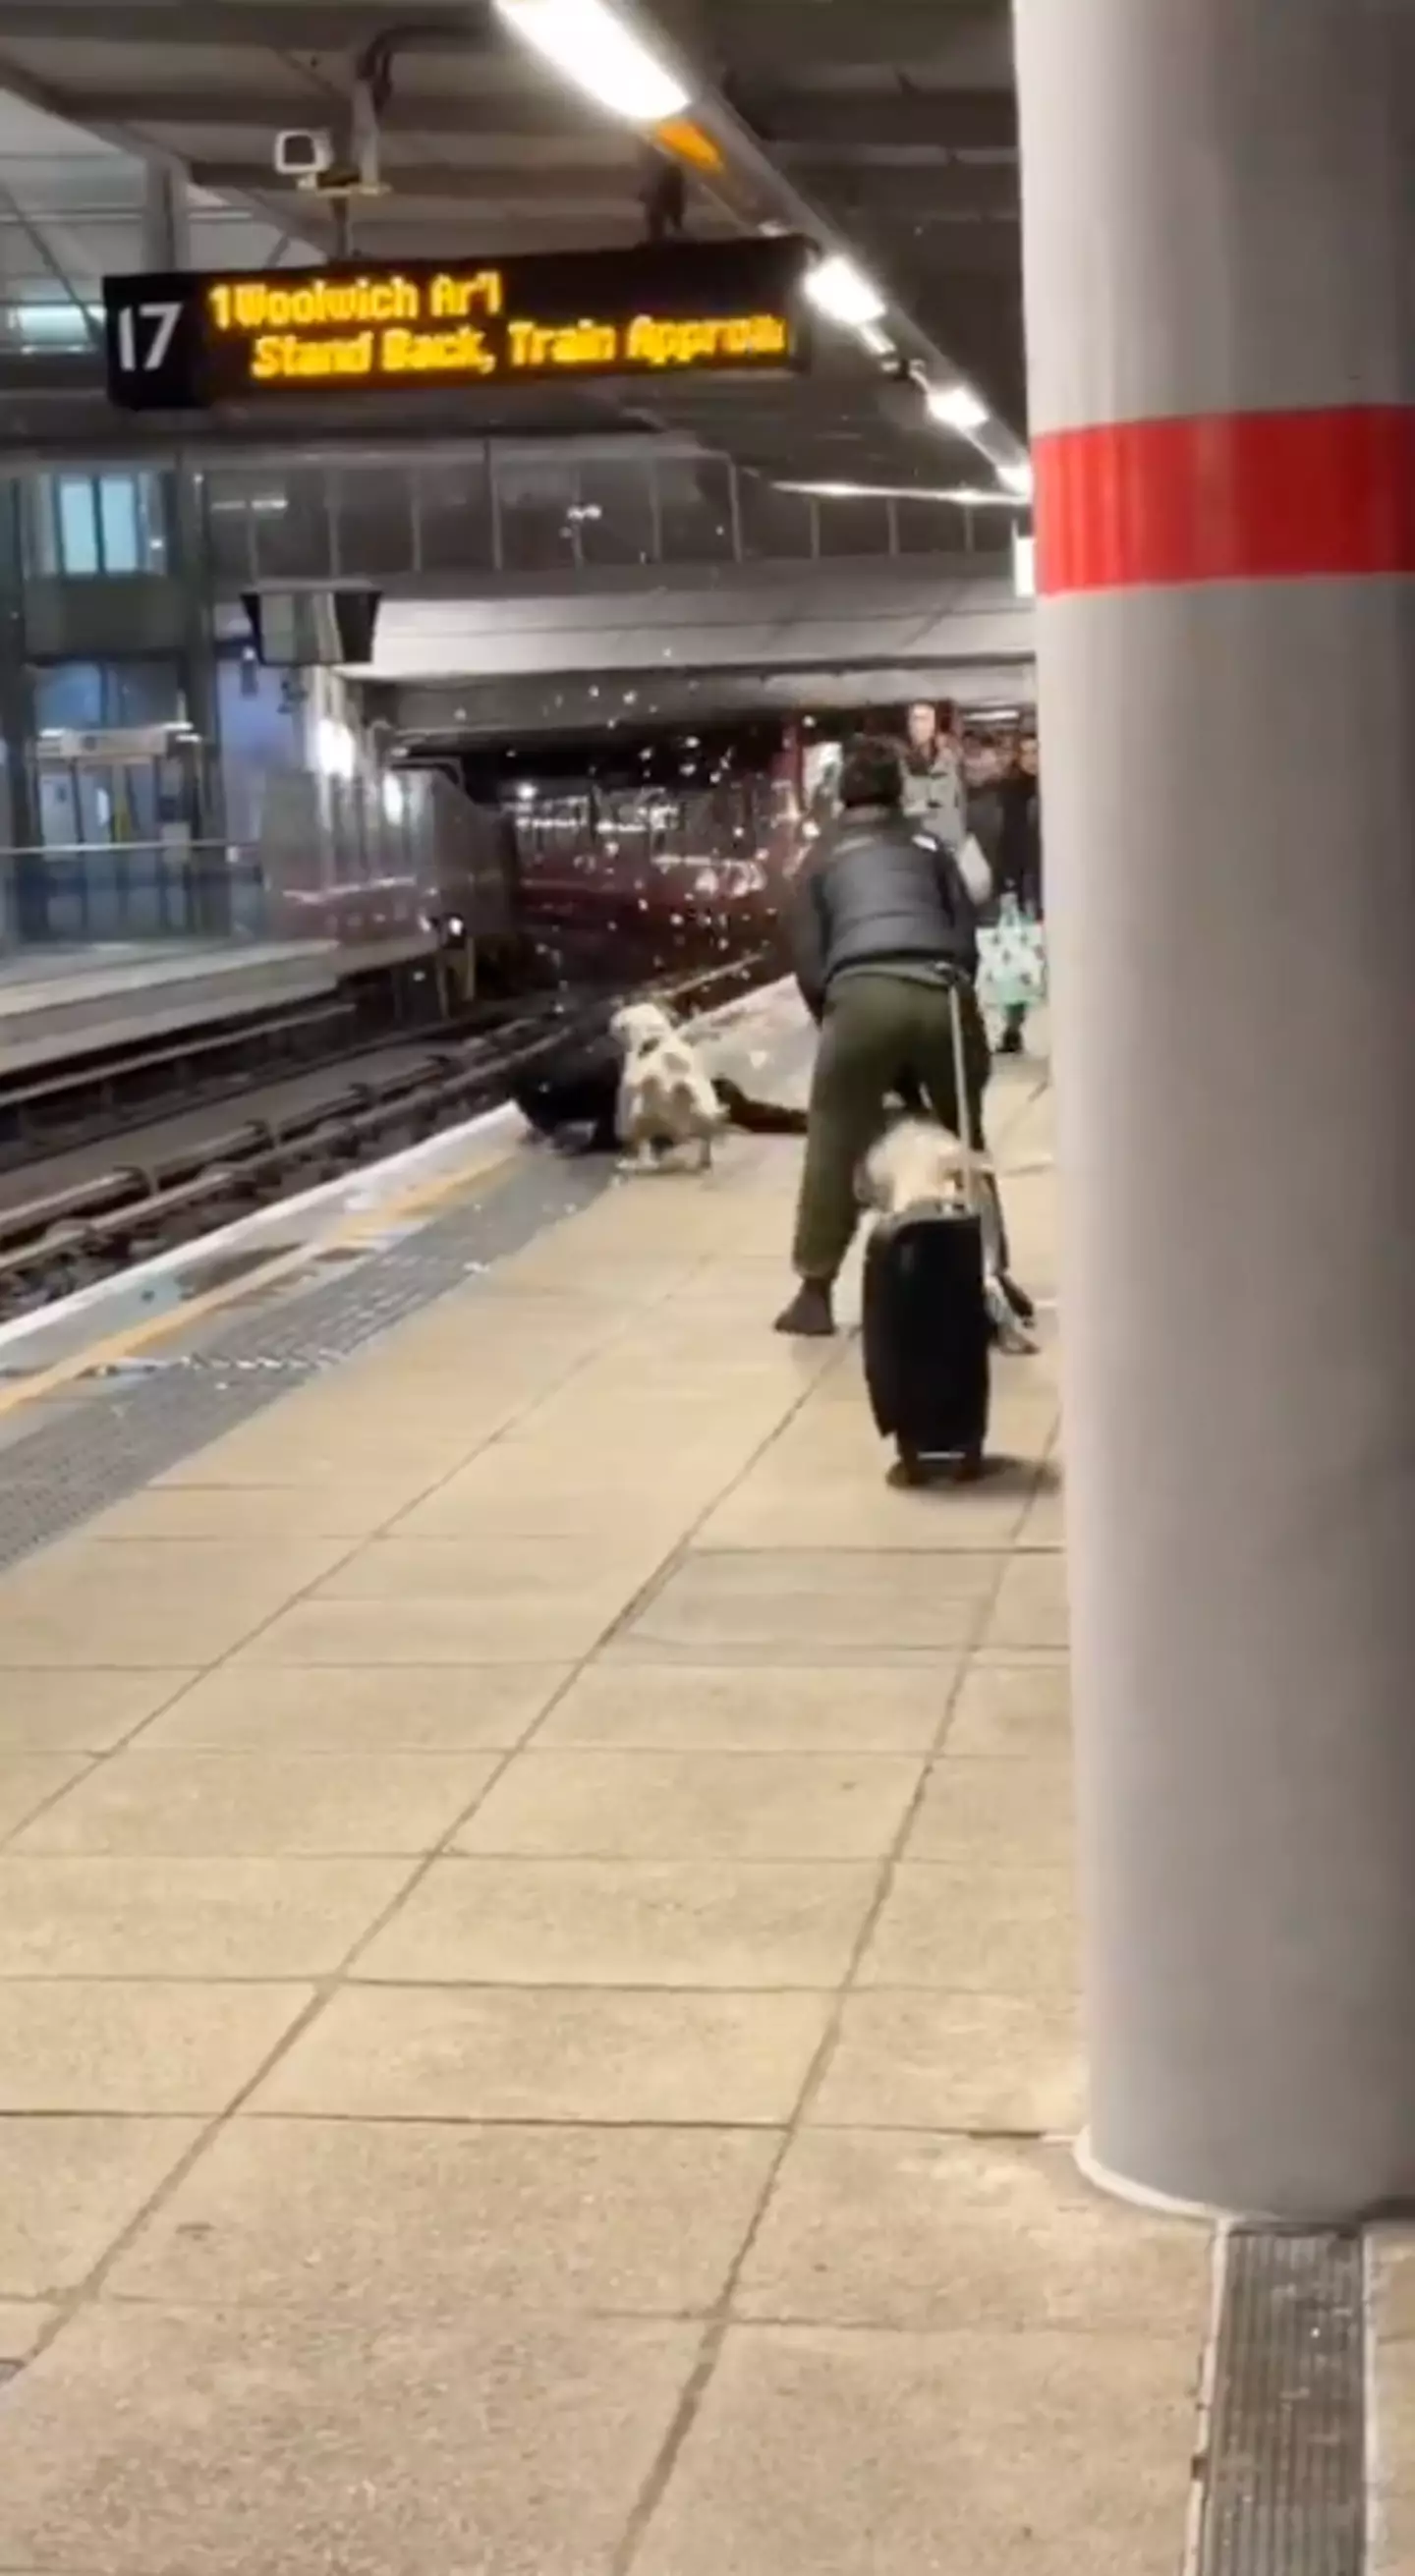 The man almost fell in front of a train during the attack.